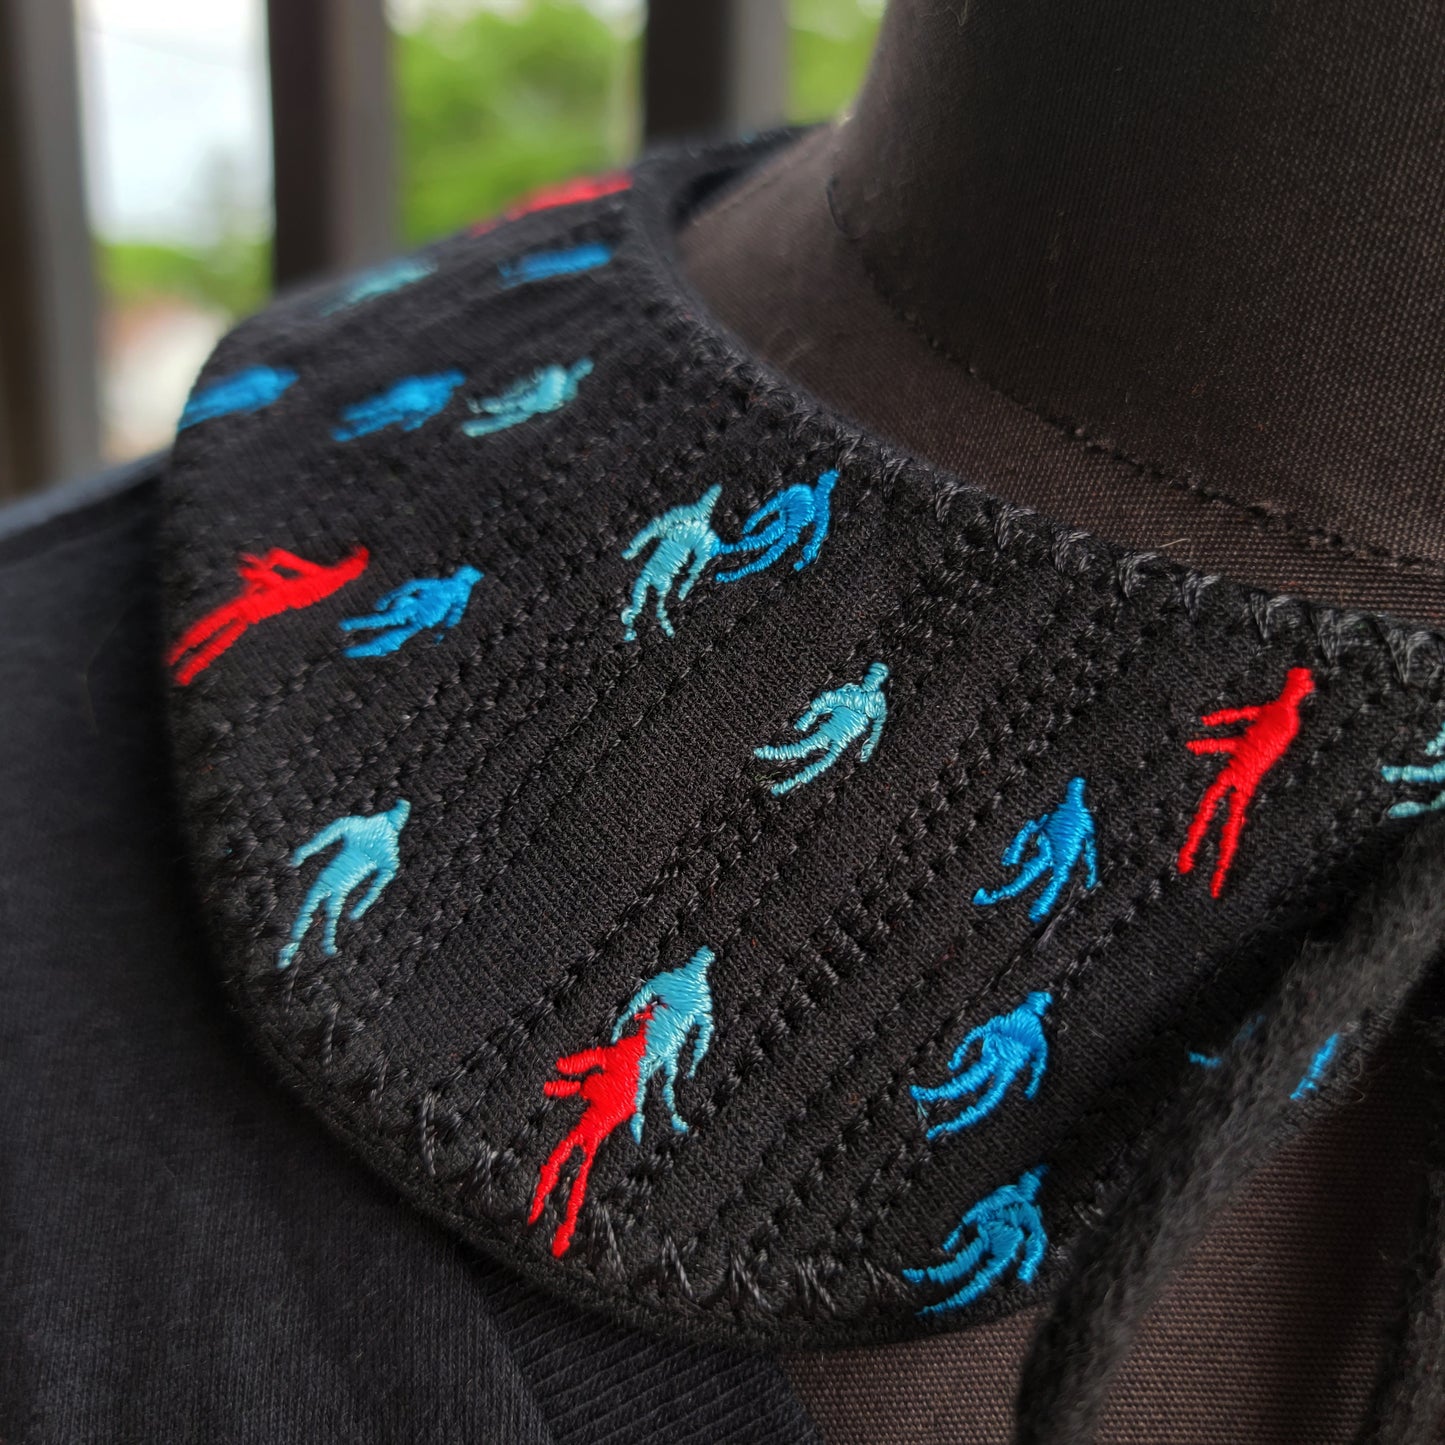 Rising/Falling Figures, Detached Peter Pan Collar - Bright Eyes Inspired Embroidered Collar